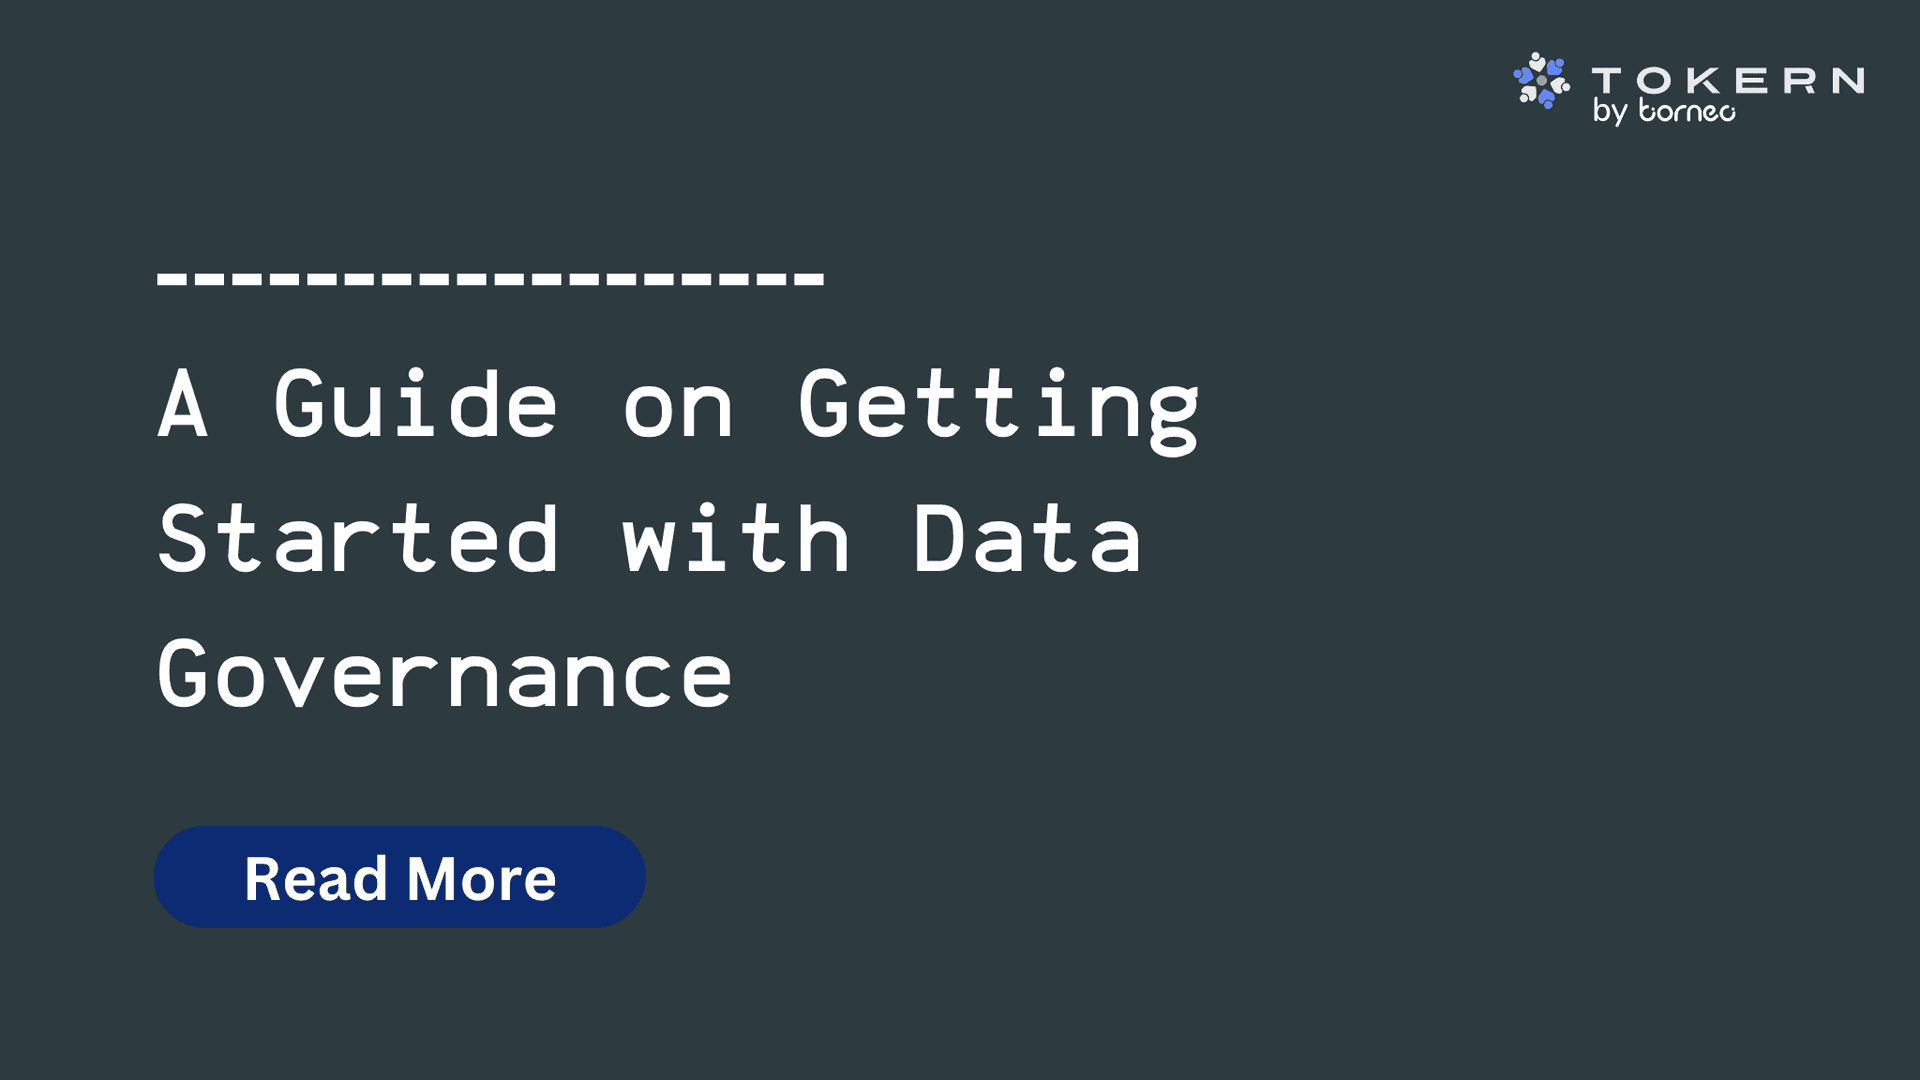 A_Guide_on_Getting_Started_with_Data_Governance_af4c1deadf.png